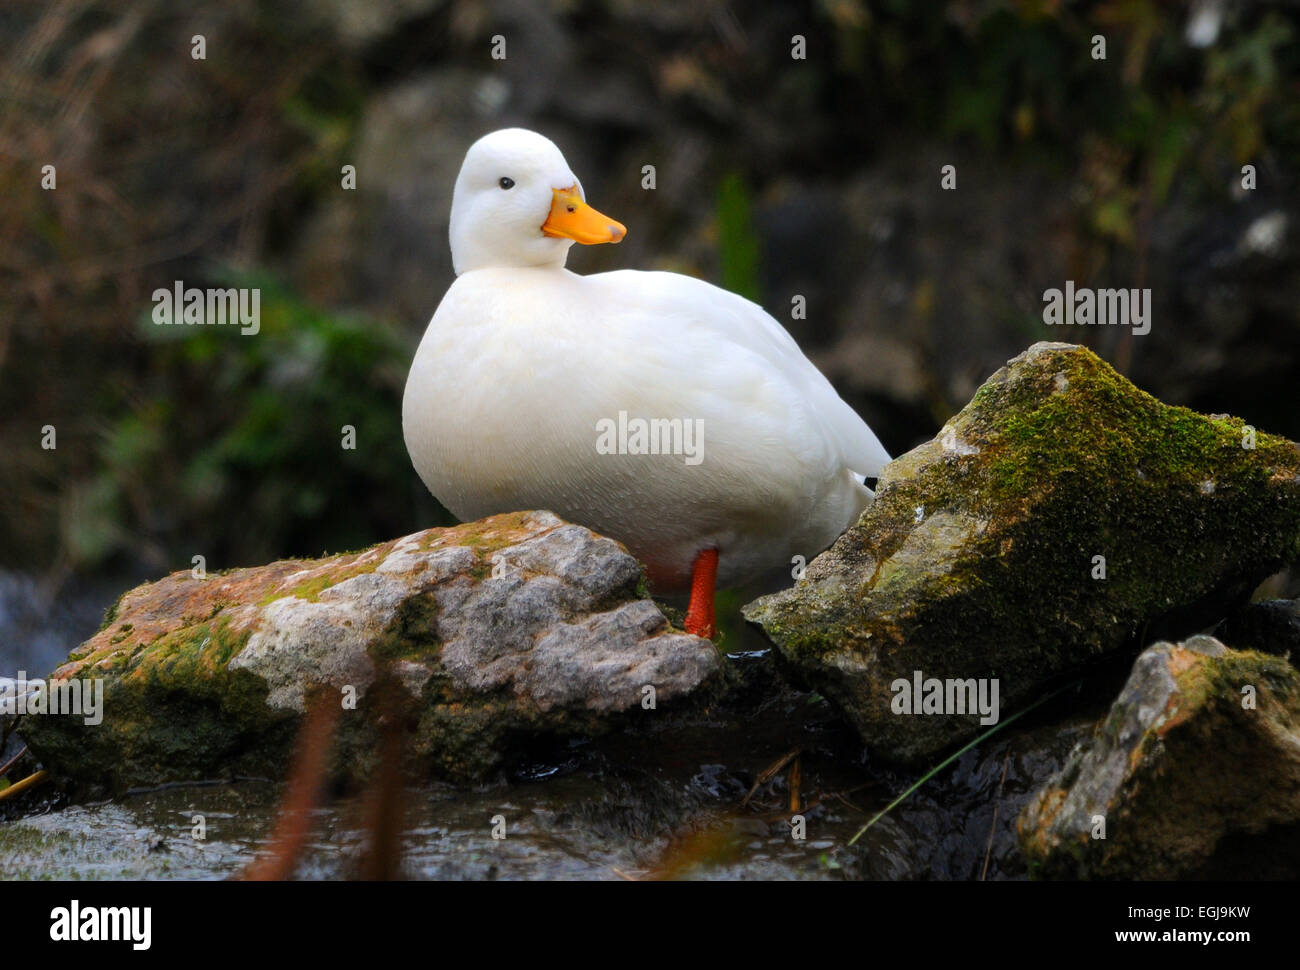 A white call duck at Arundel, West Sussex Stock Photo